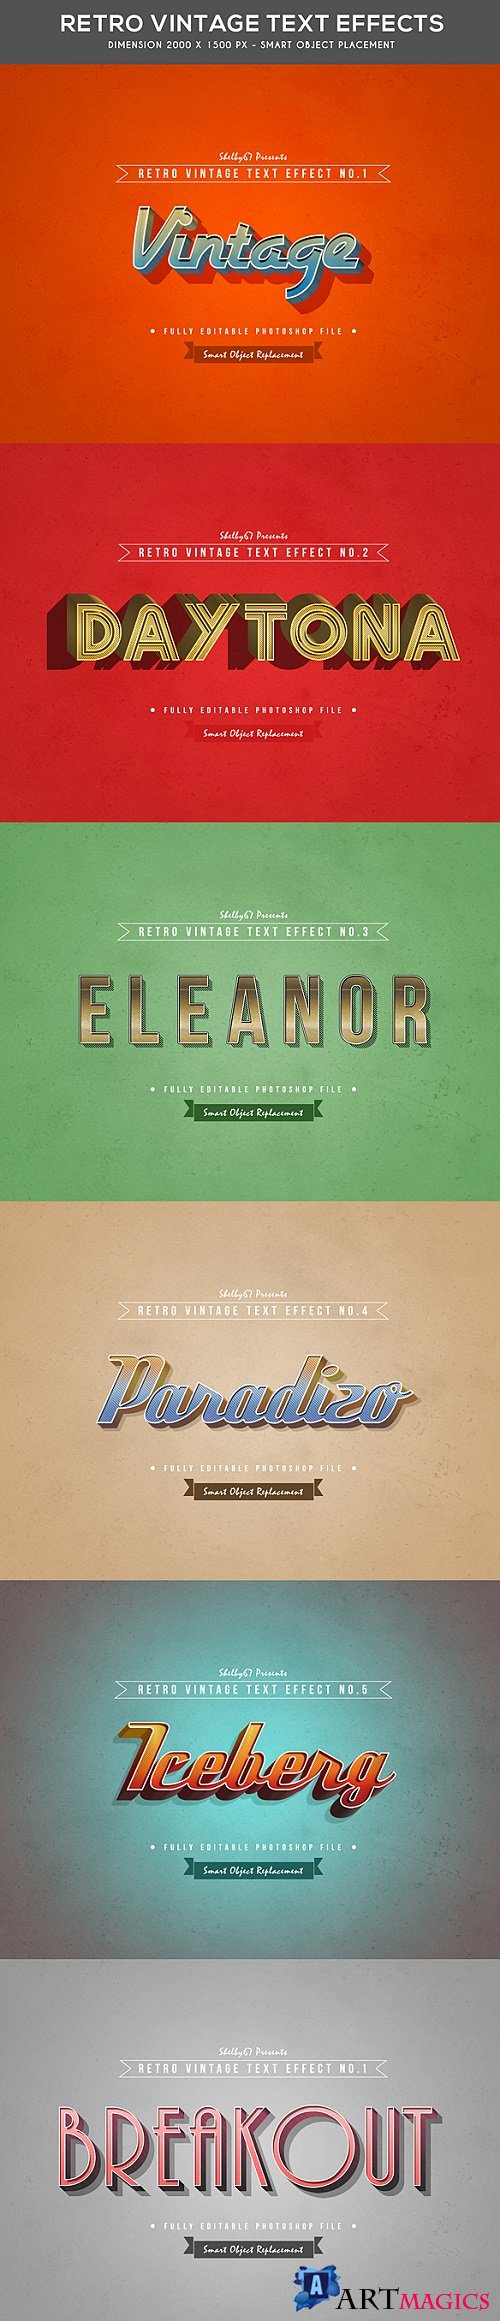 Retro Vintage Text Effects 21142668